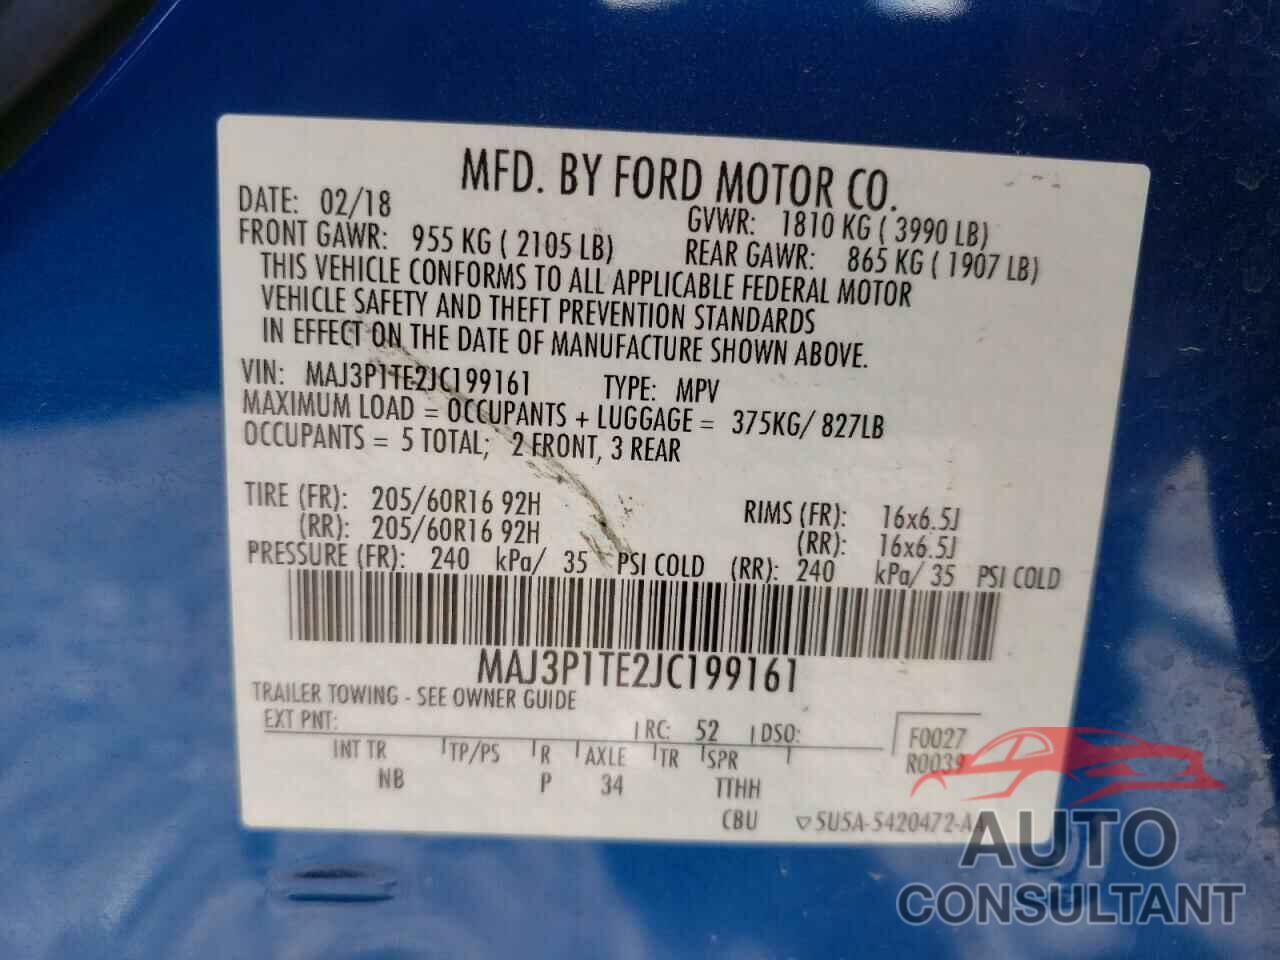 FORD ALL OTHER 2018 - MAJ3P1TE2JC199161